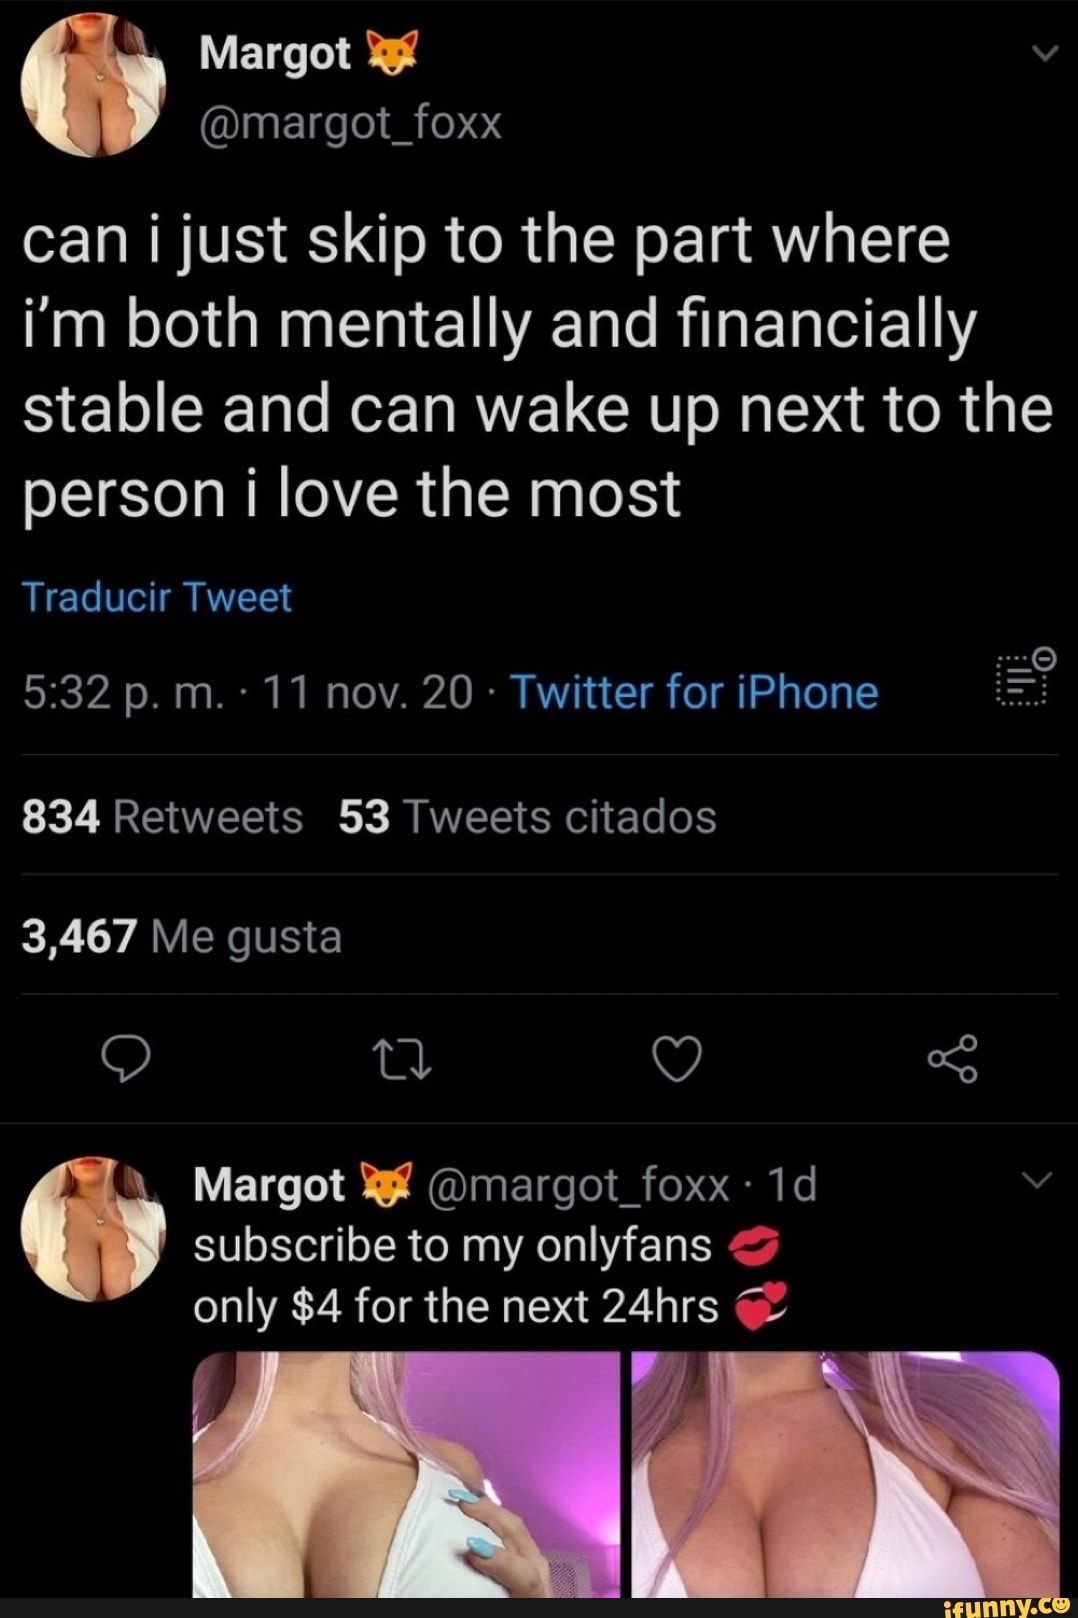 Onlyfans co lm